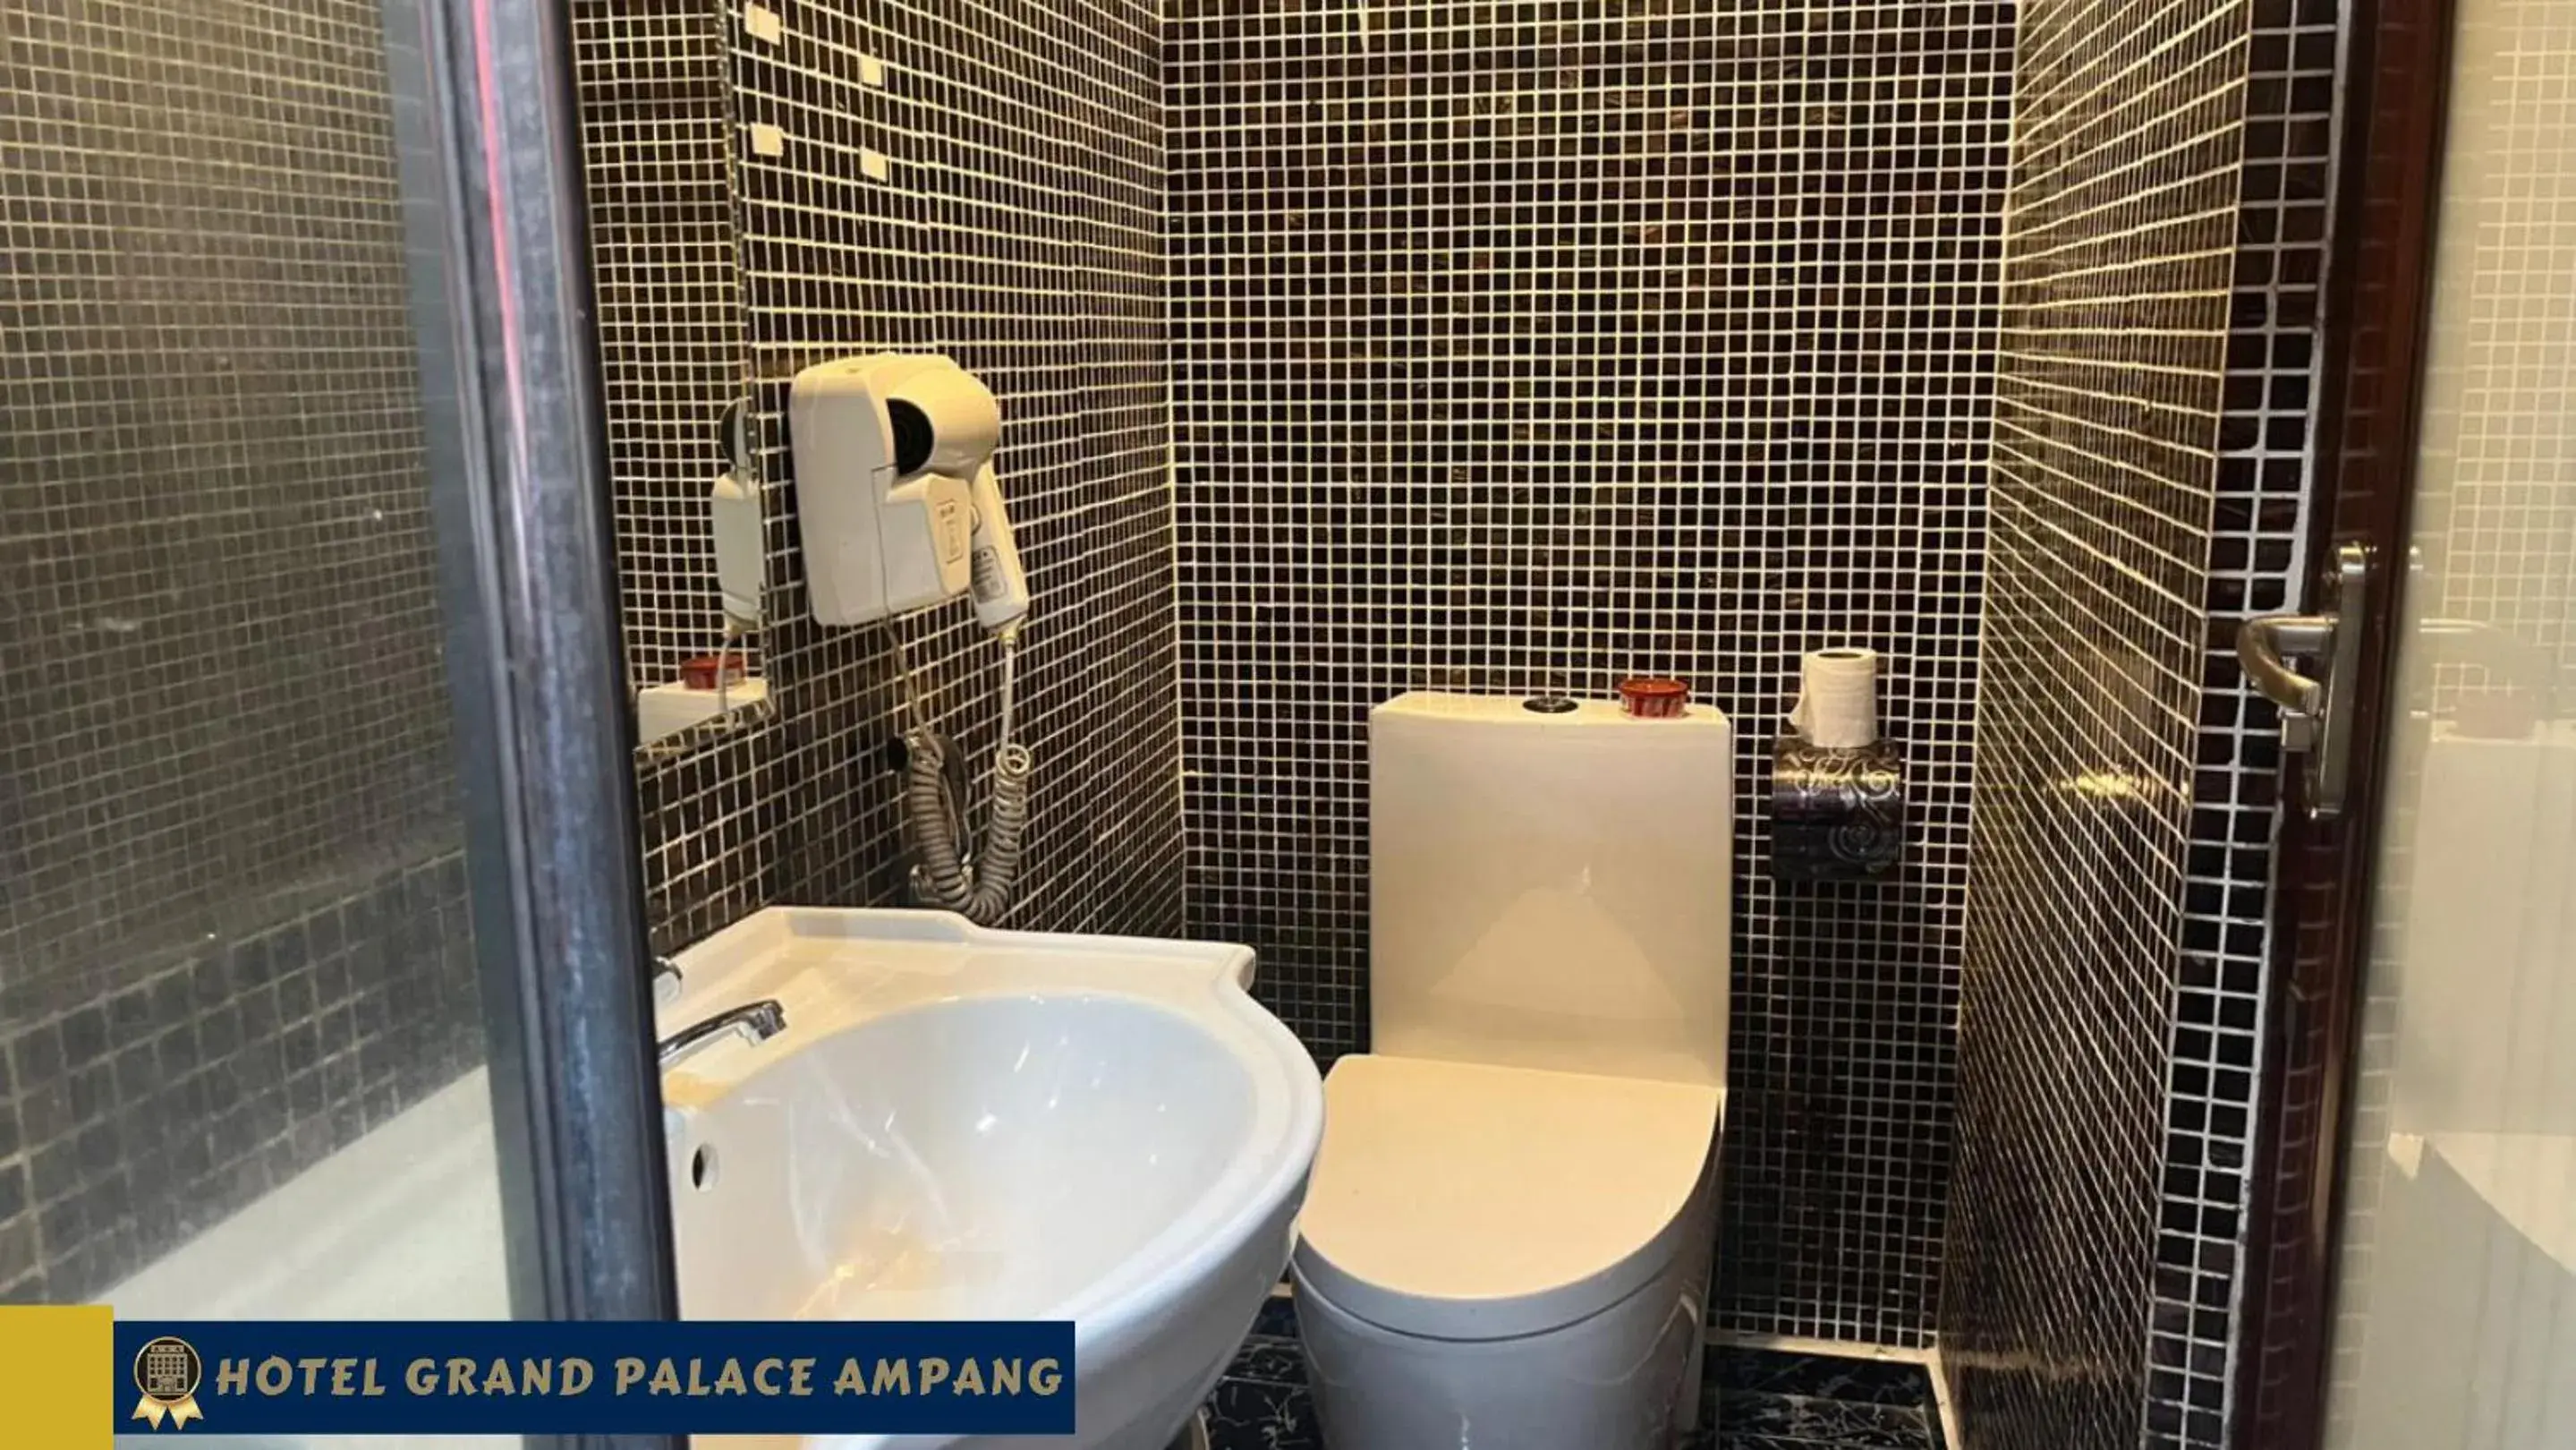 Toilet, Bathroom in Hotel Grand Palace Ampang